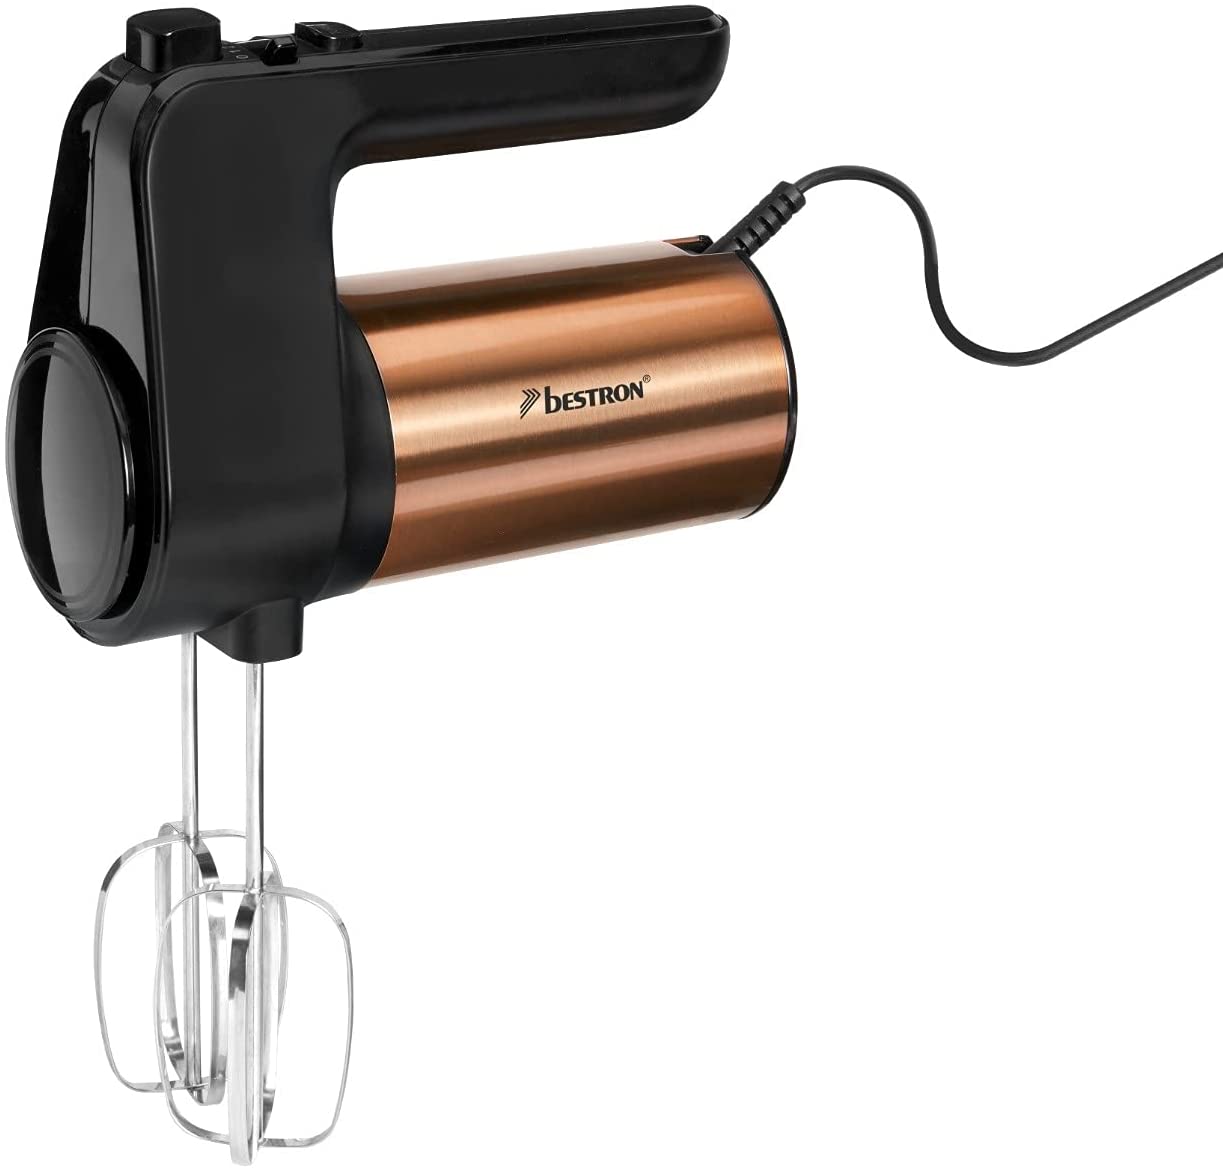 Bestron AHM1000CO Power Hand Mixer, Electric Hand Mixer with 2 Whisk and 2 Dough Hooks, 6 Levels, 400 Watt, Black/Copper, Plastic